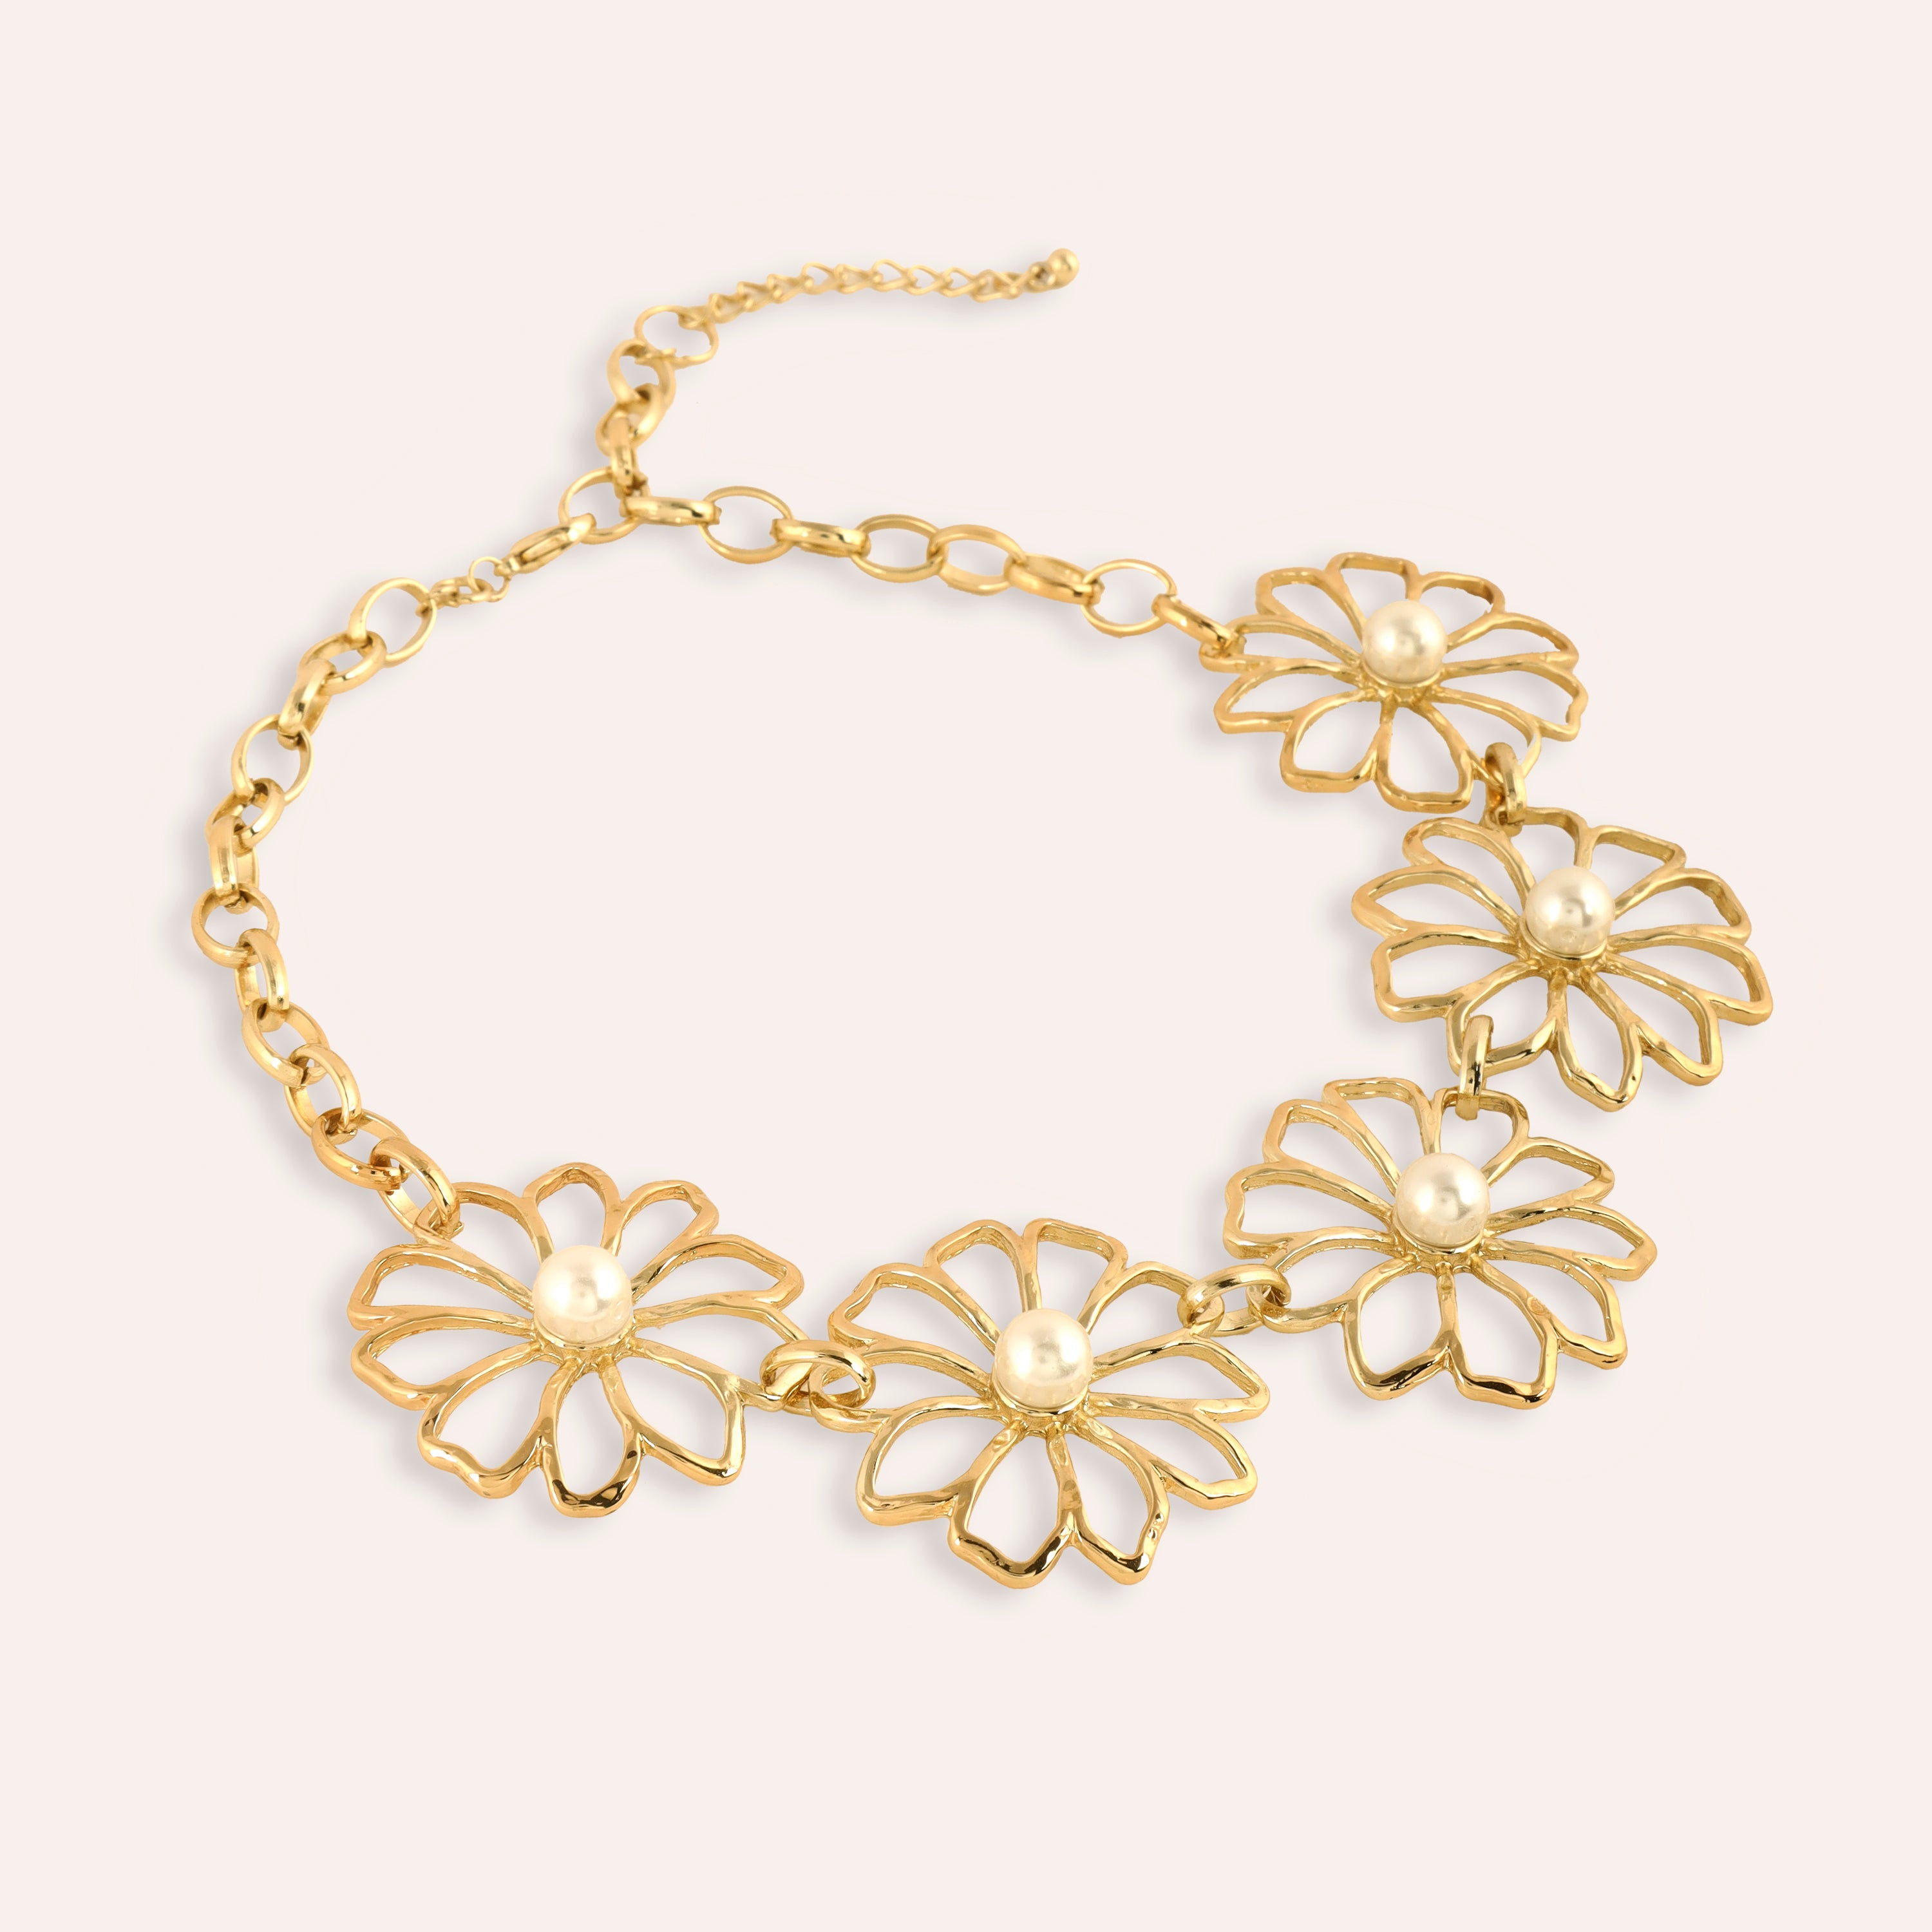 TFC Poppy Petal Gold Plated Necklace-Enhance your elegance with our collection of gold-plated necklaces for women. Choose from stunning pendant necklaces, chic choker necklaces, and trendy layered necklaces. Our sleek and dainty designs are both affordable and anti-tarnish, ensuring lasting beauty. Enjoy the cheapest fashion jewellery, lightweight and stylish- only at The Fun Company